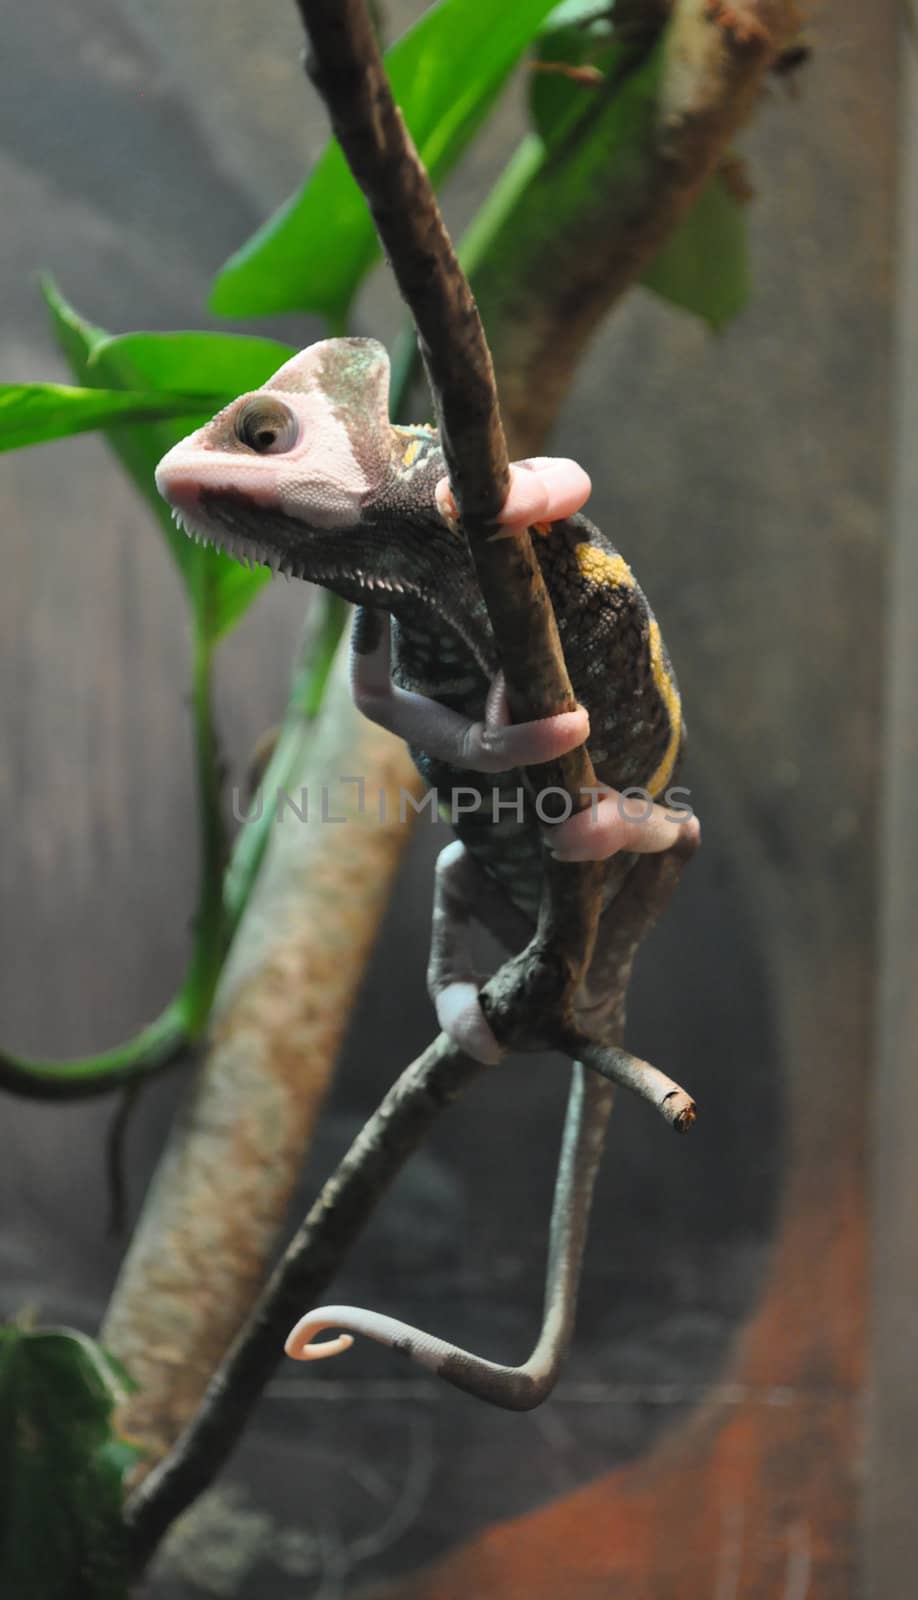 Clinging Pink Lizard by RefocusPhoto